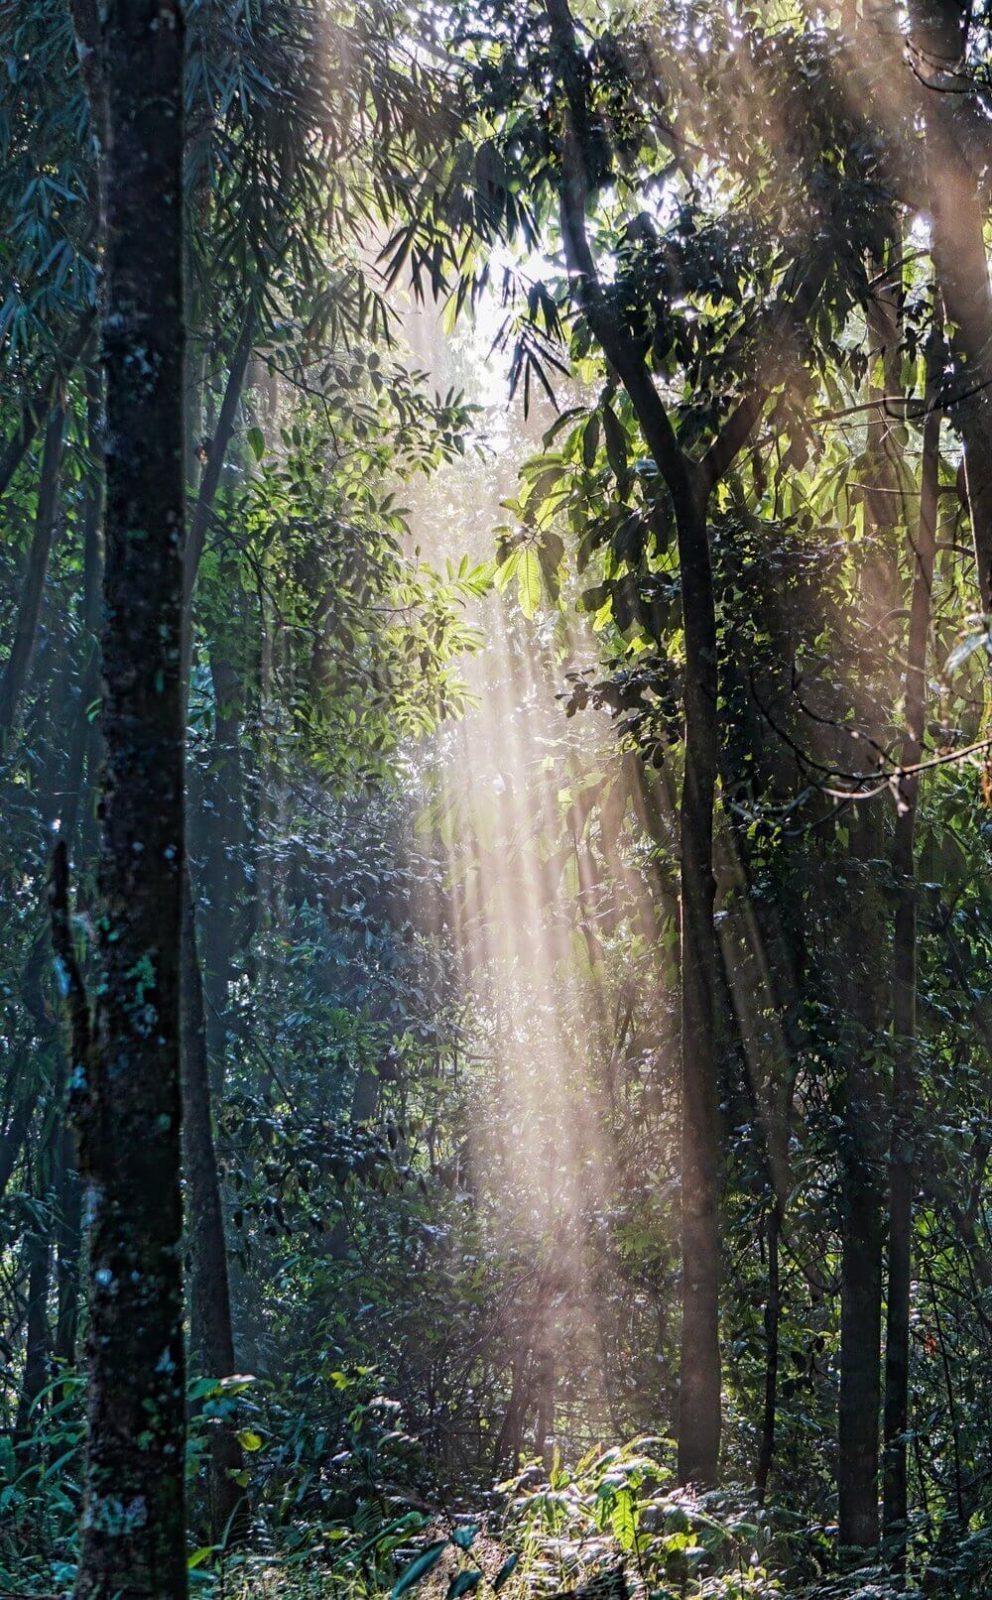 Kaeng Krachan National Park - an age old forest with light streaming in